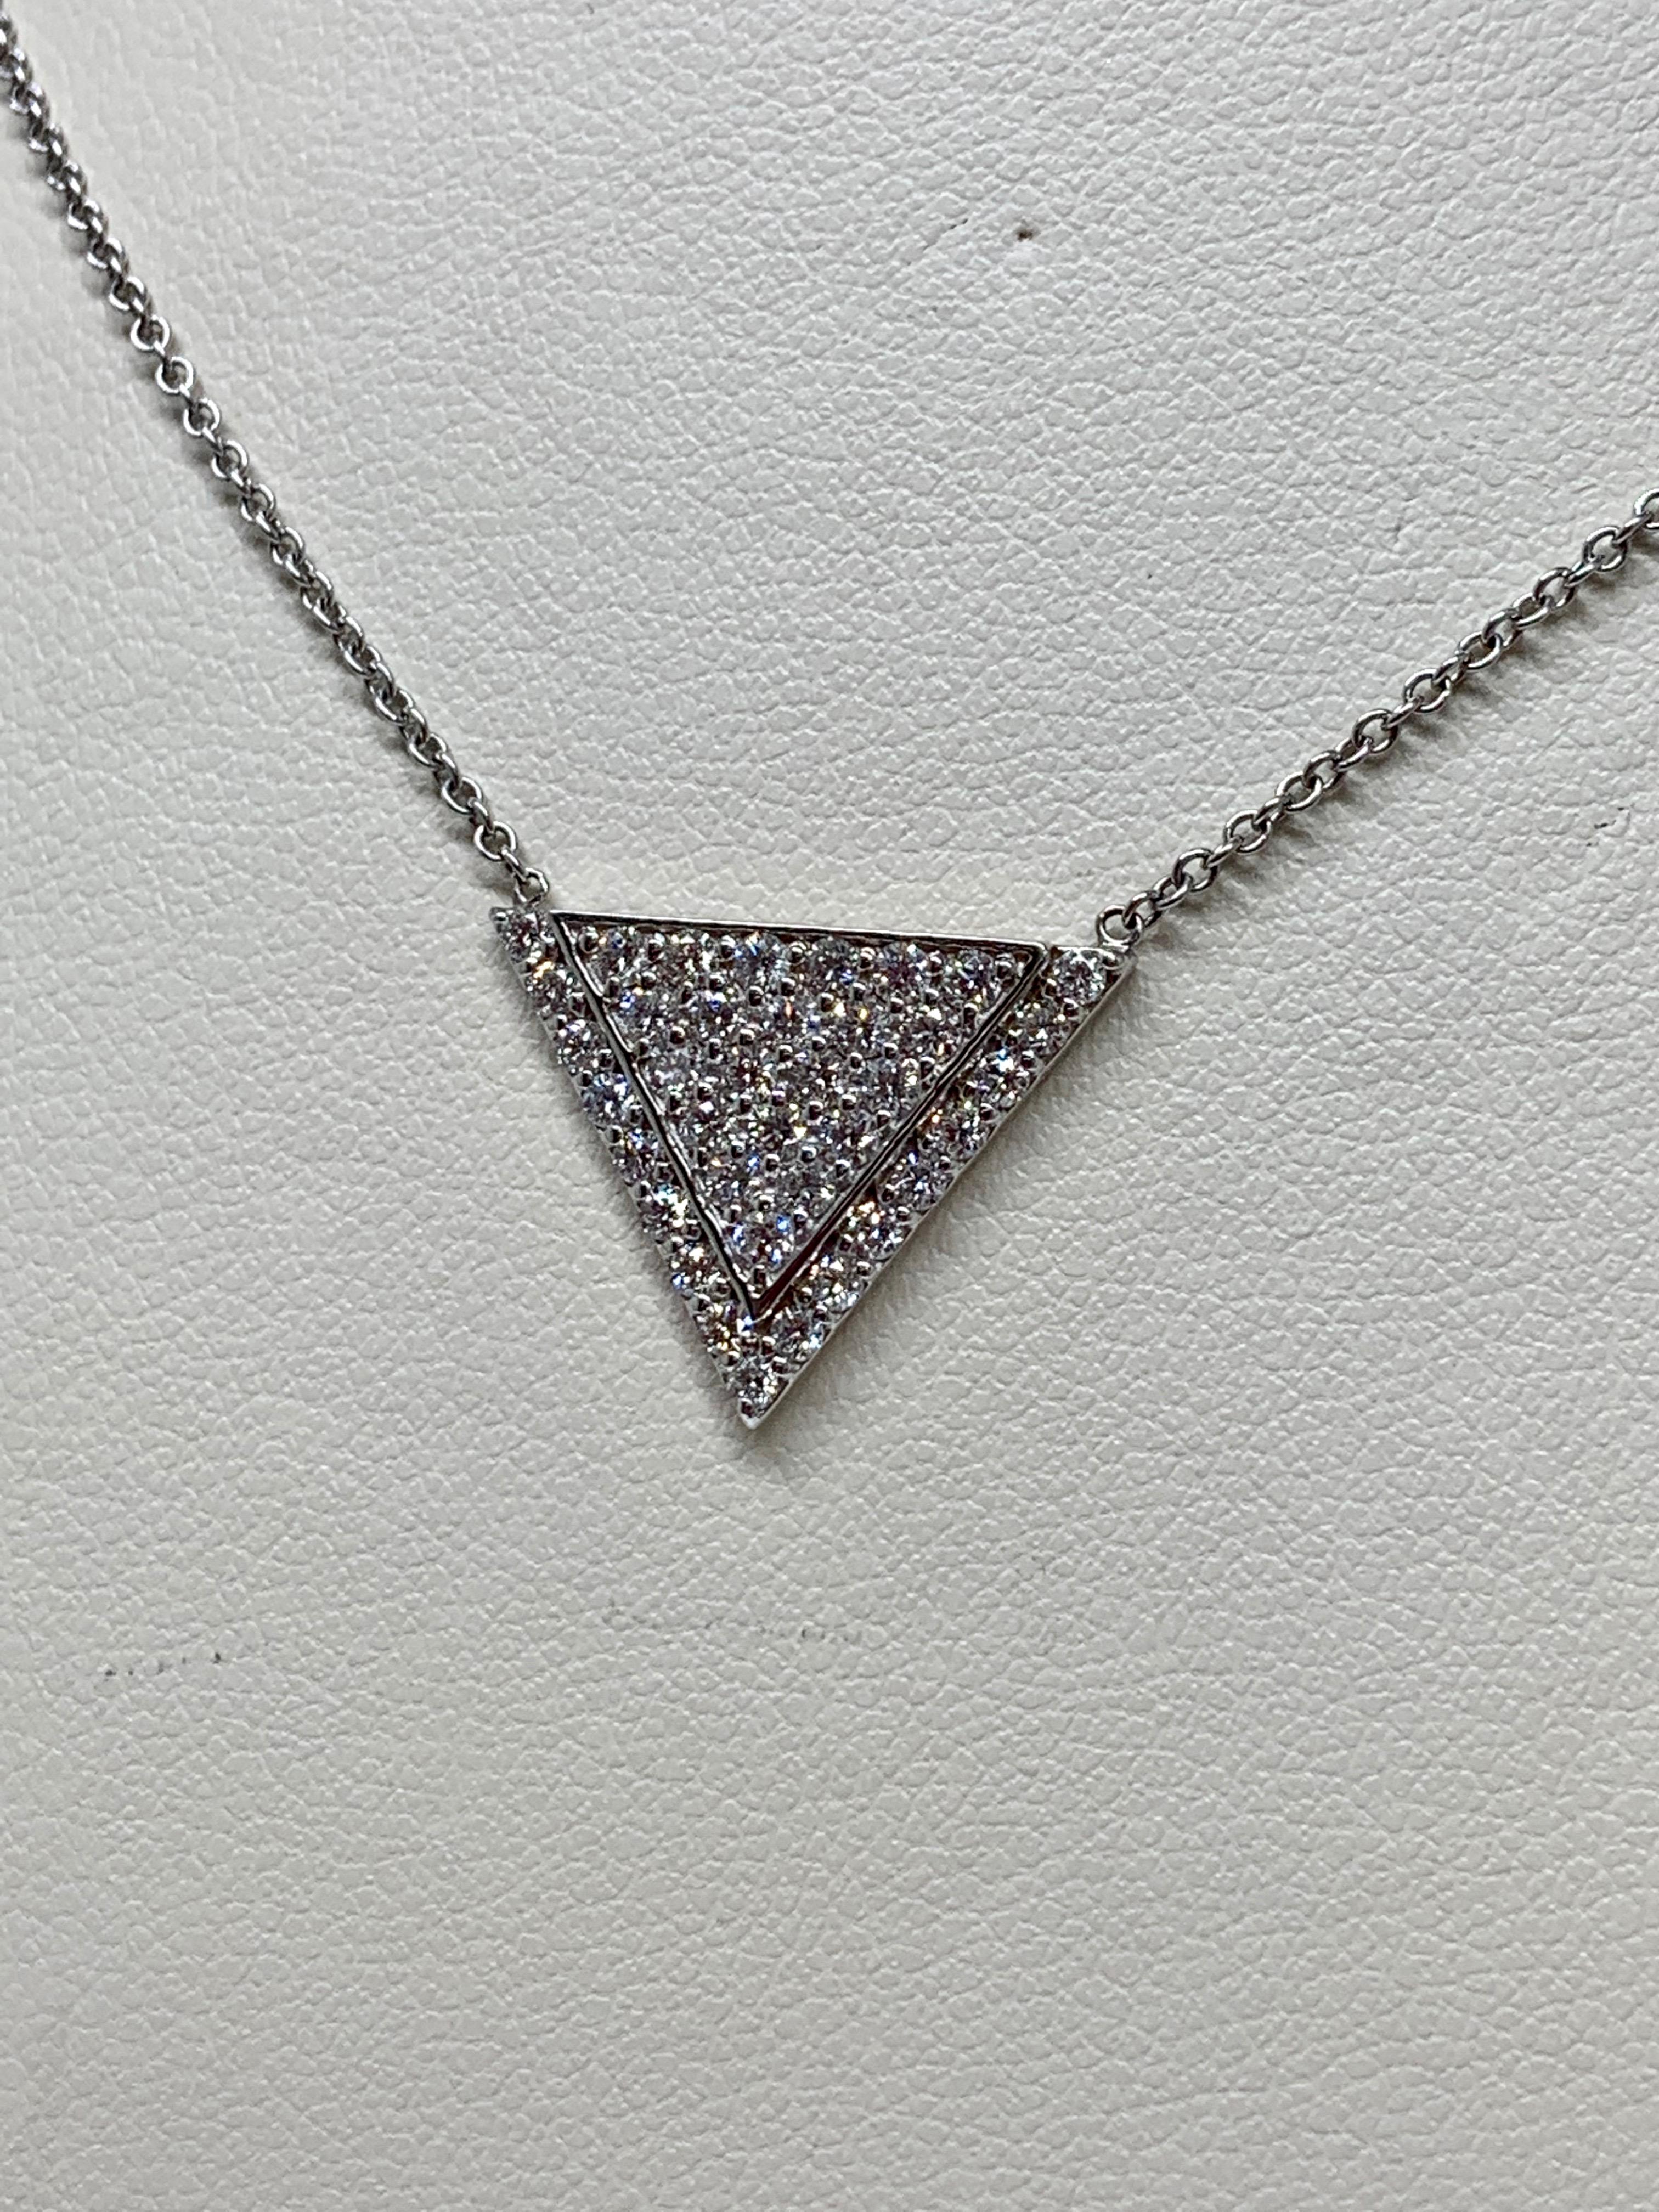 This gorgeous triangular necklace holds 0.70 carats of round white diamonds. This necklace includes an 14k white gold 18 inch, 1 millimeter cable chain with a sturdy lobster claw clasp. The pendant itself is 0.75 inches wide and 0.55 inches long. 